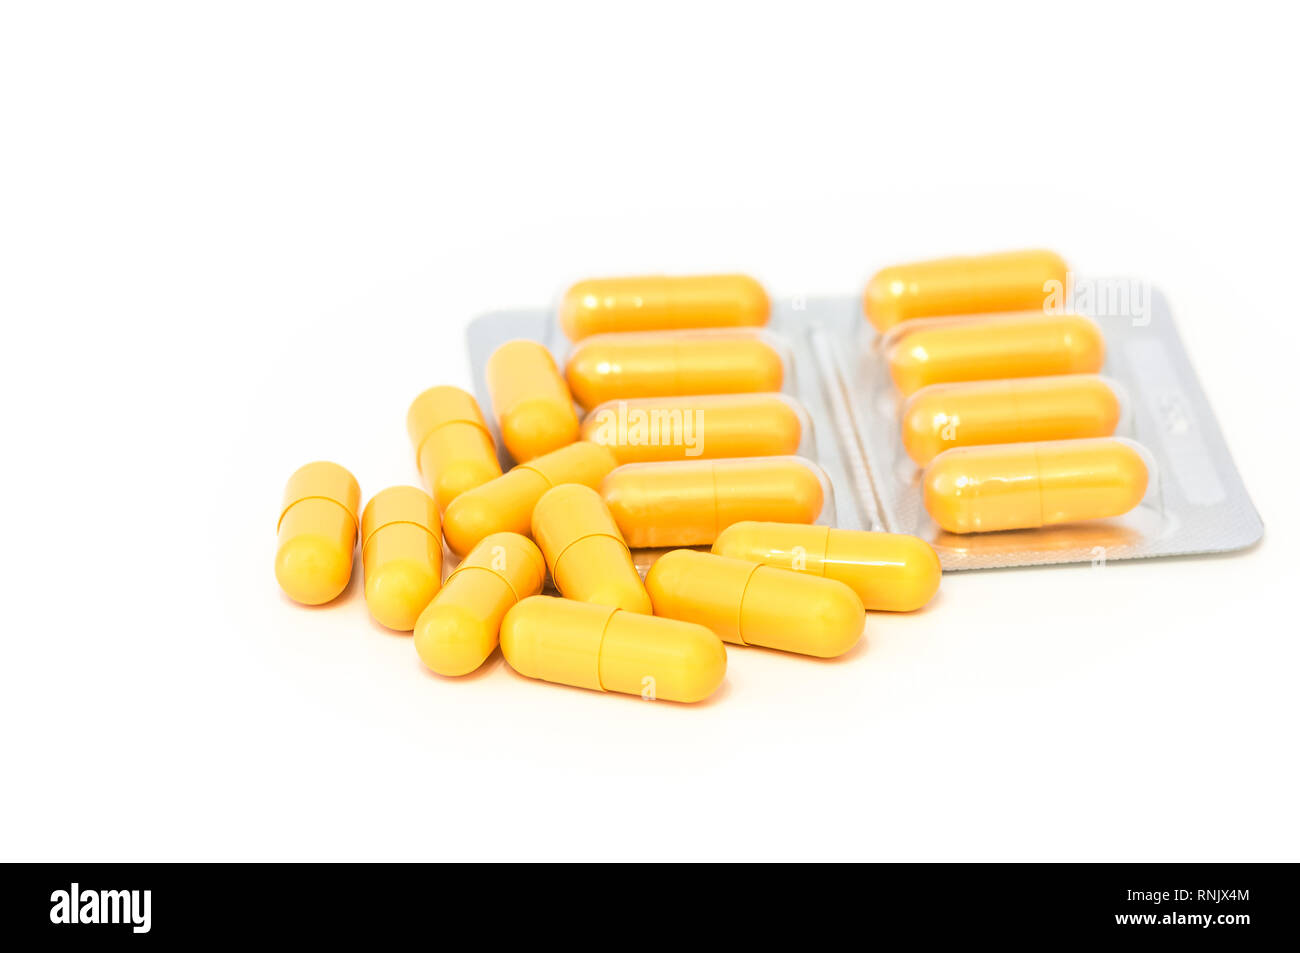 Download Bright Yellow Pills And Blisters Scattered On A White Background Isolated Stock Photo Alamy Yellowimages Mockups